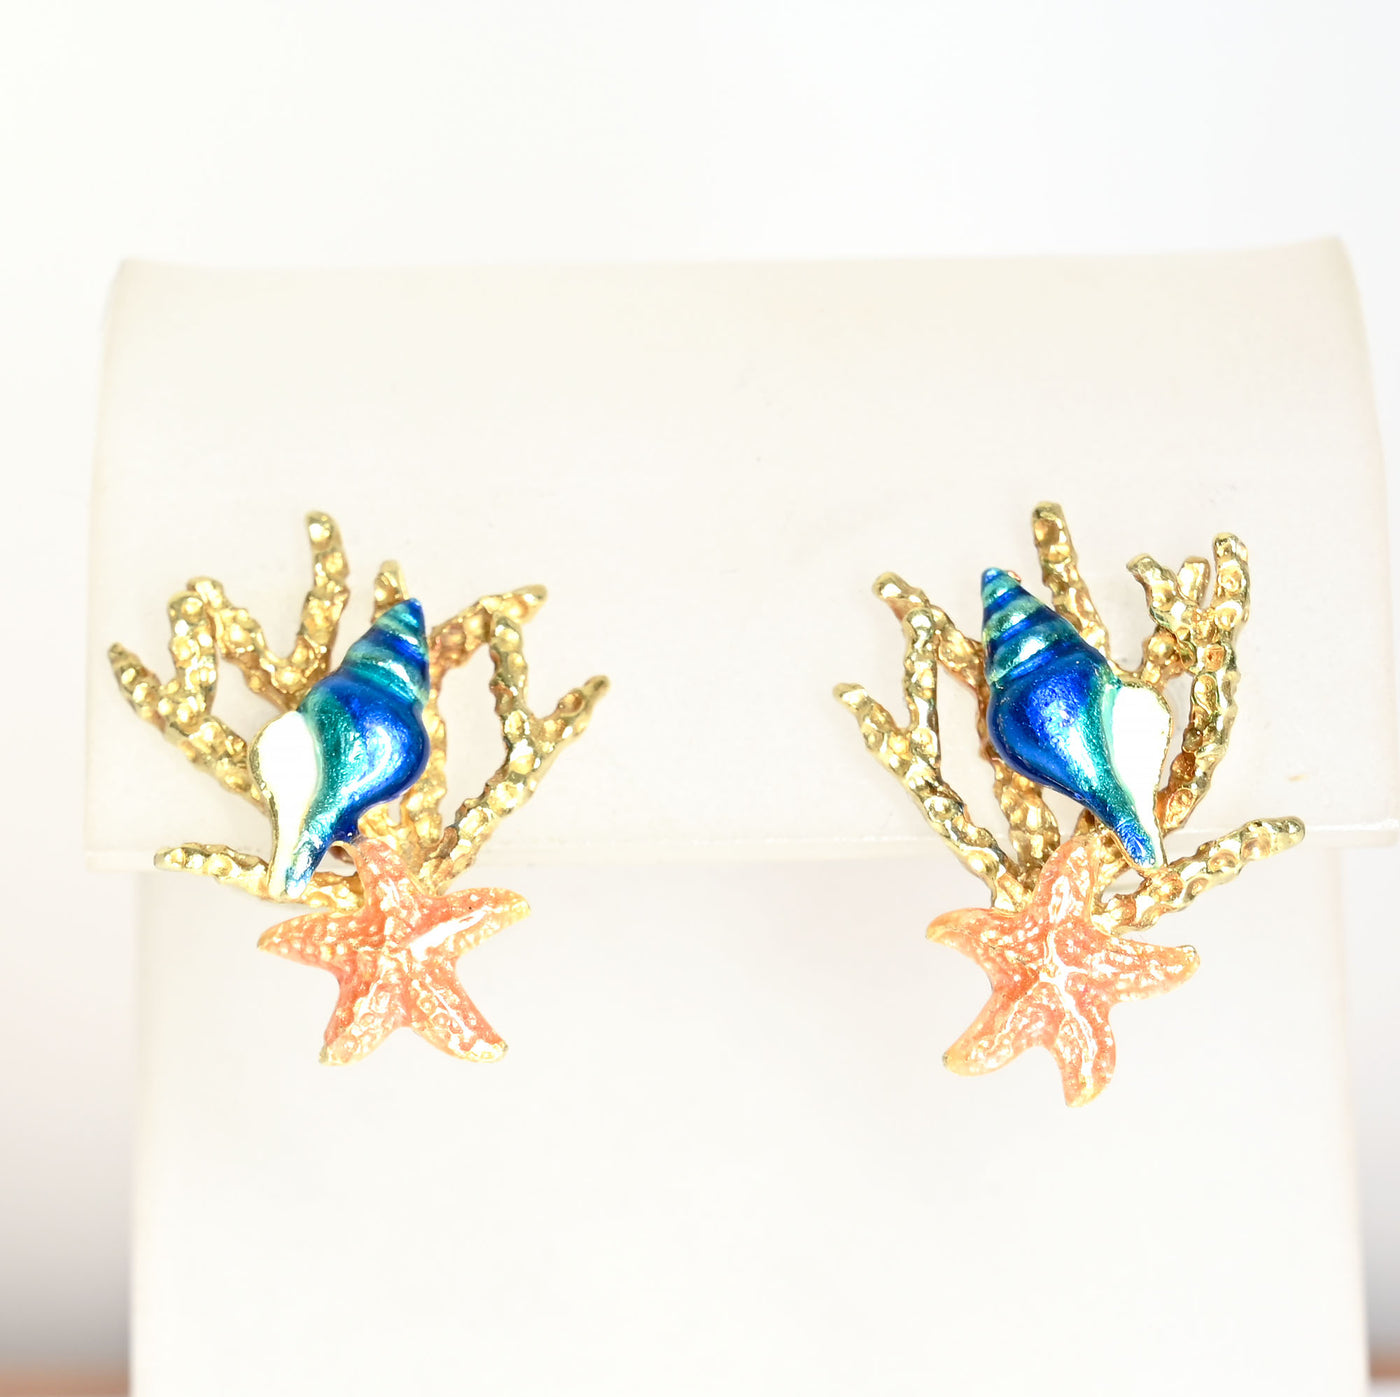 Enamel Shell, Coral and Starfish Earrings